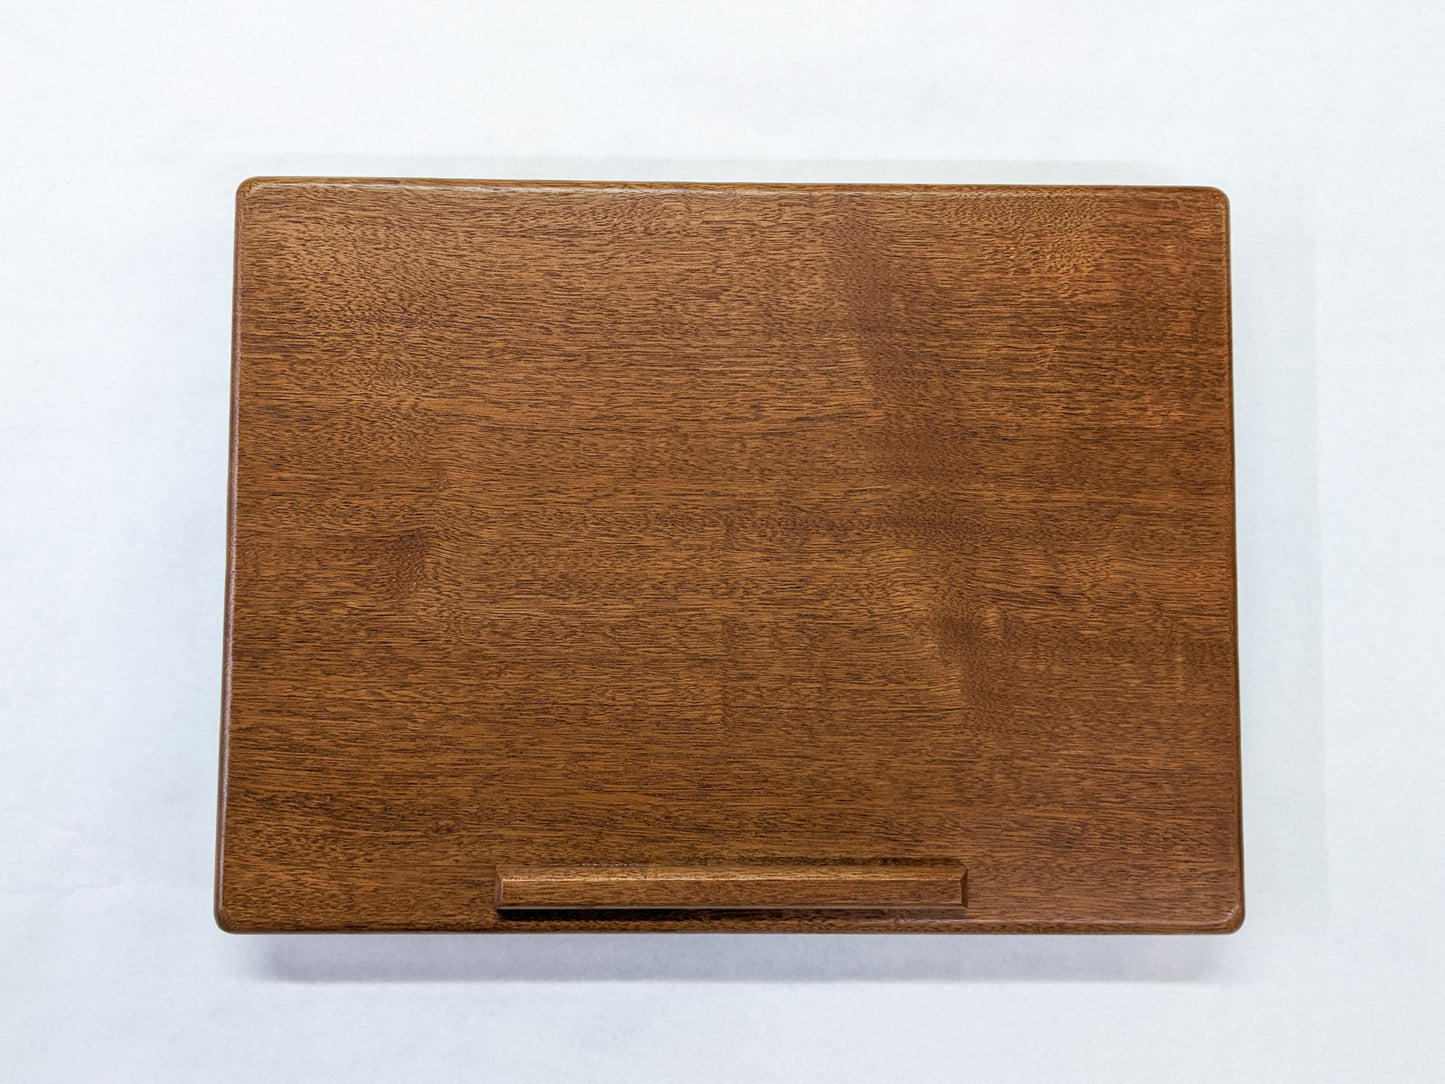 The surface of our Mahogany Leather Cushion Lap Desk. The mahogany wood is rich and the edges of the desk are soft and rounded. A protruding lip provides a stylish way to rest books or laptops. 